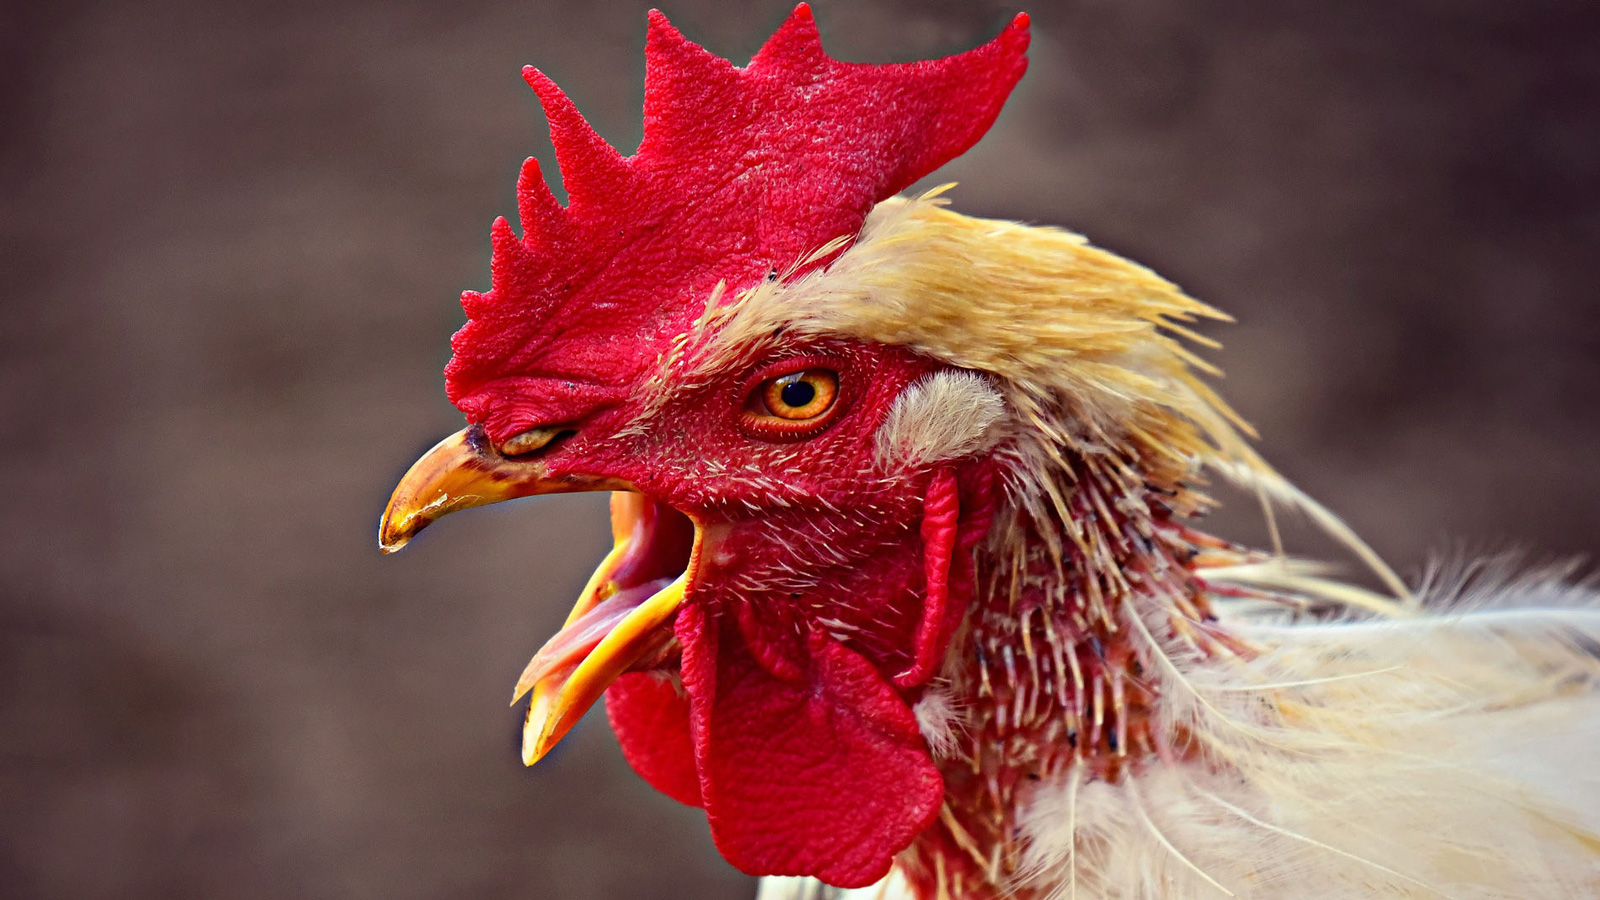 County sets limits on roosters outside UGA